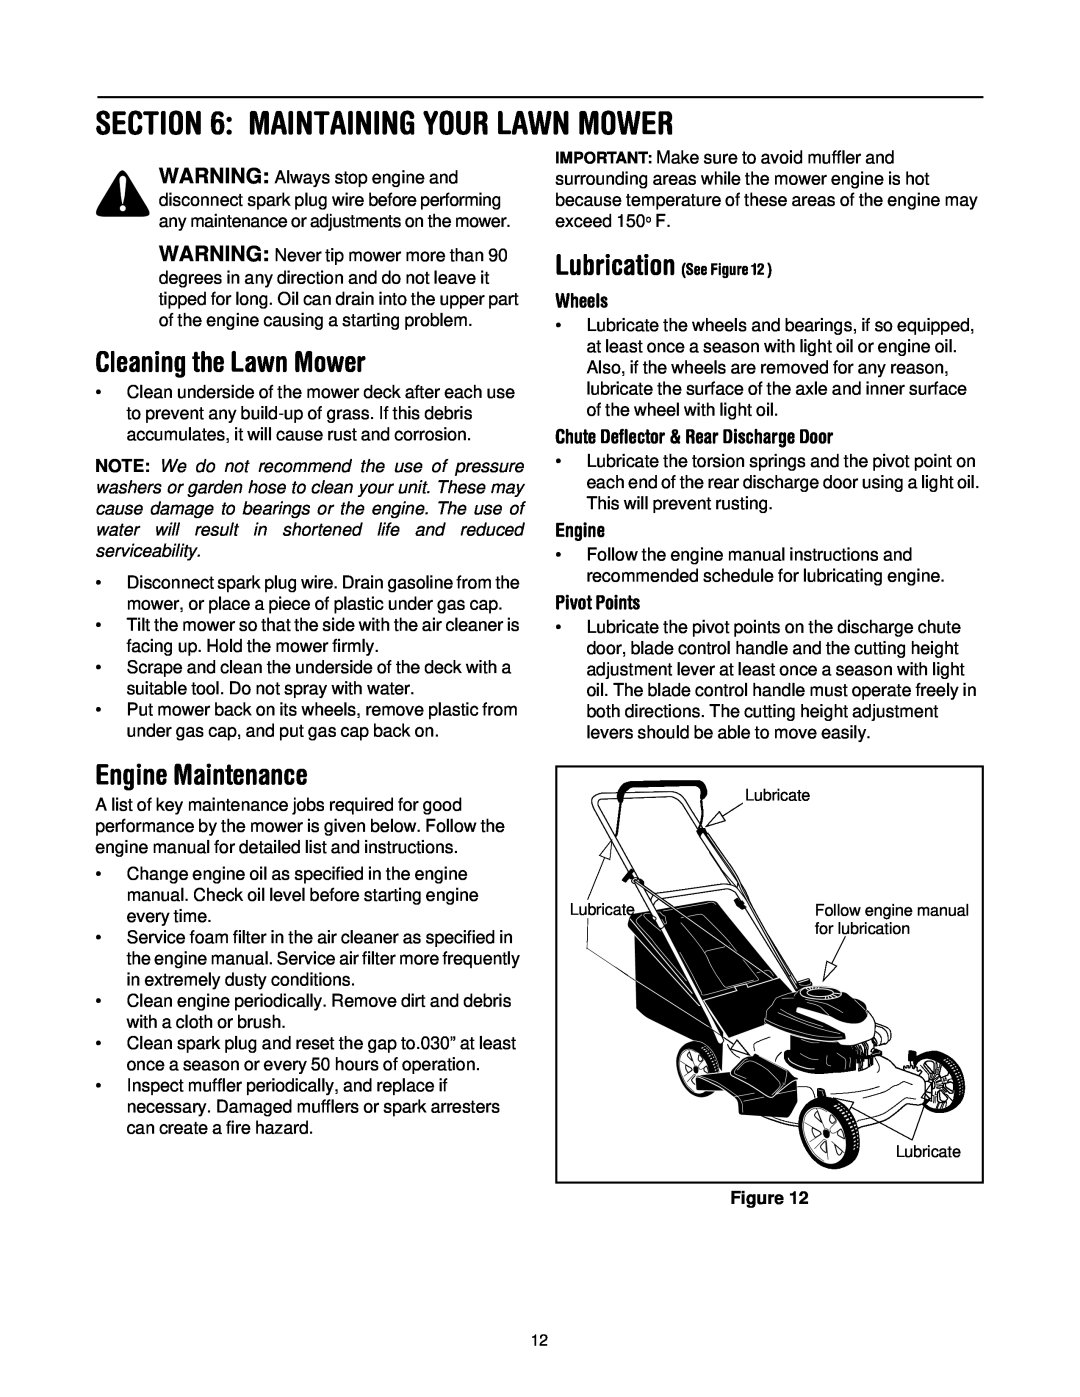 Troy-Bilt 436 manual Maintaining Your Lawn Mower, Cleaning the Lawn Mower, Engine Maintenance, Wheels, Pivot Points 